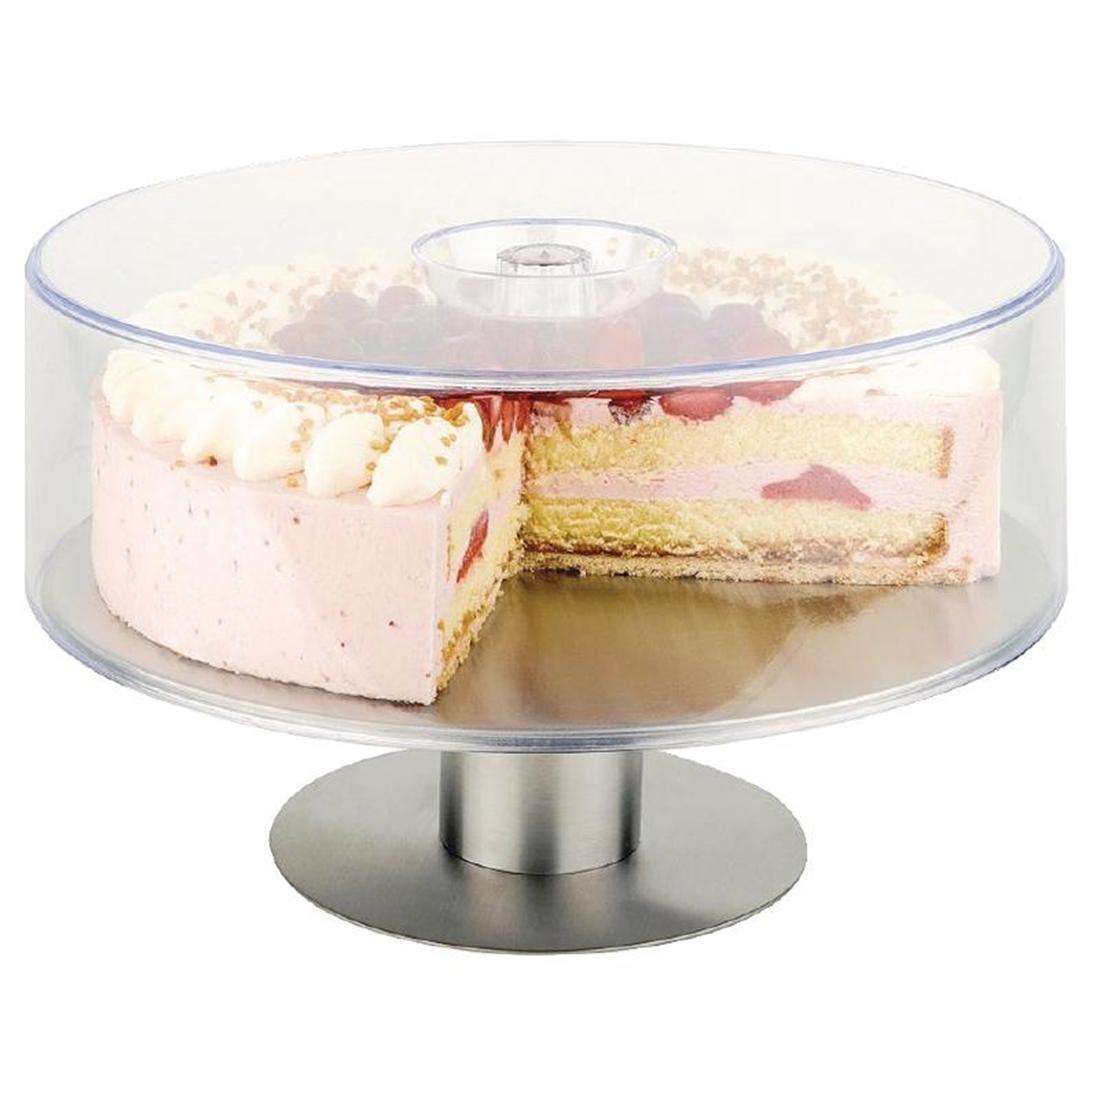 APS Lid for Rotating Lazy Susan Cake Stand - U263  - 2